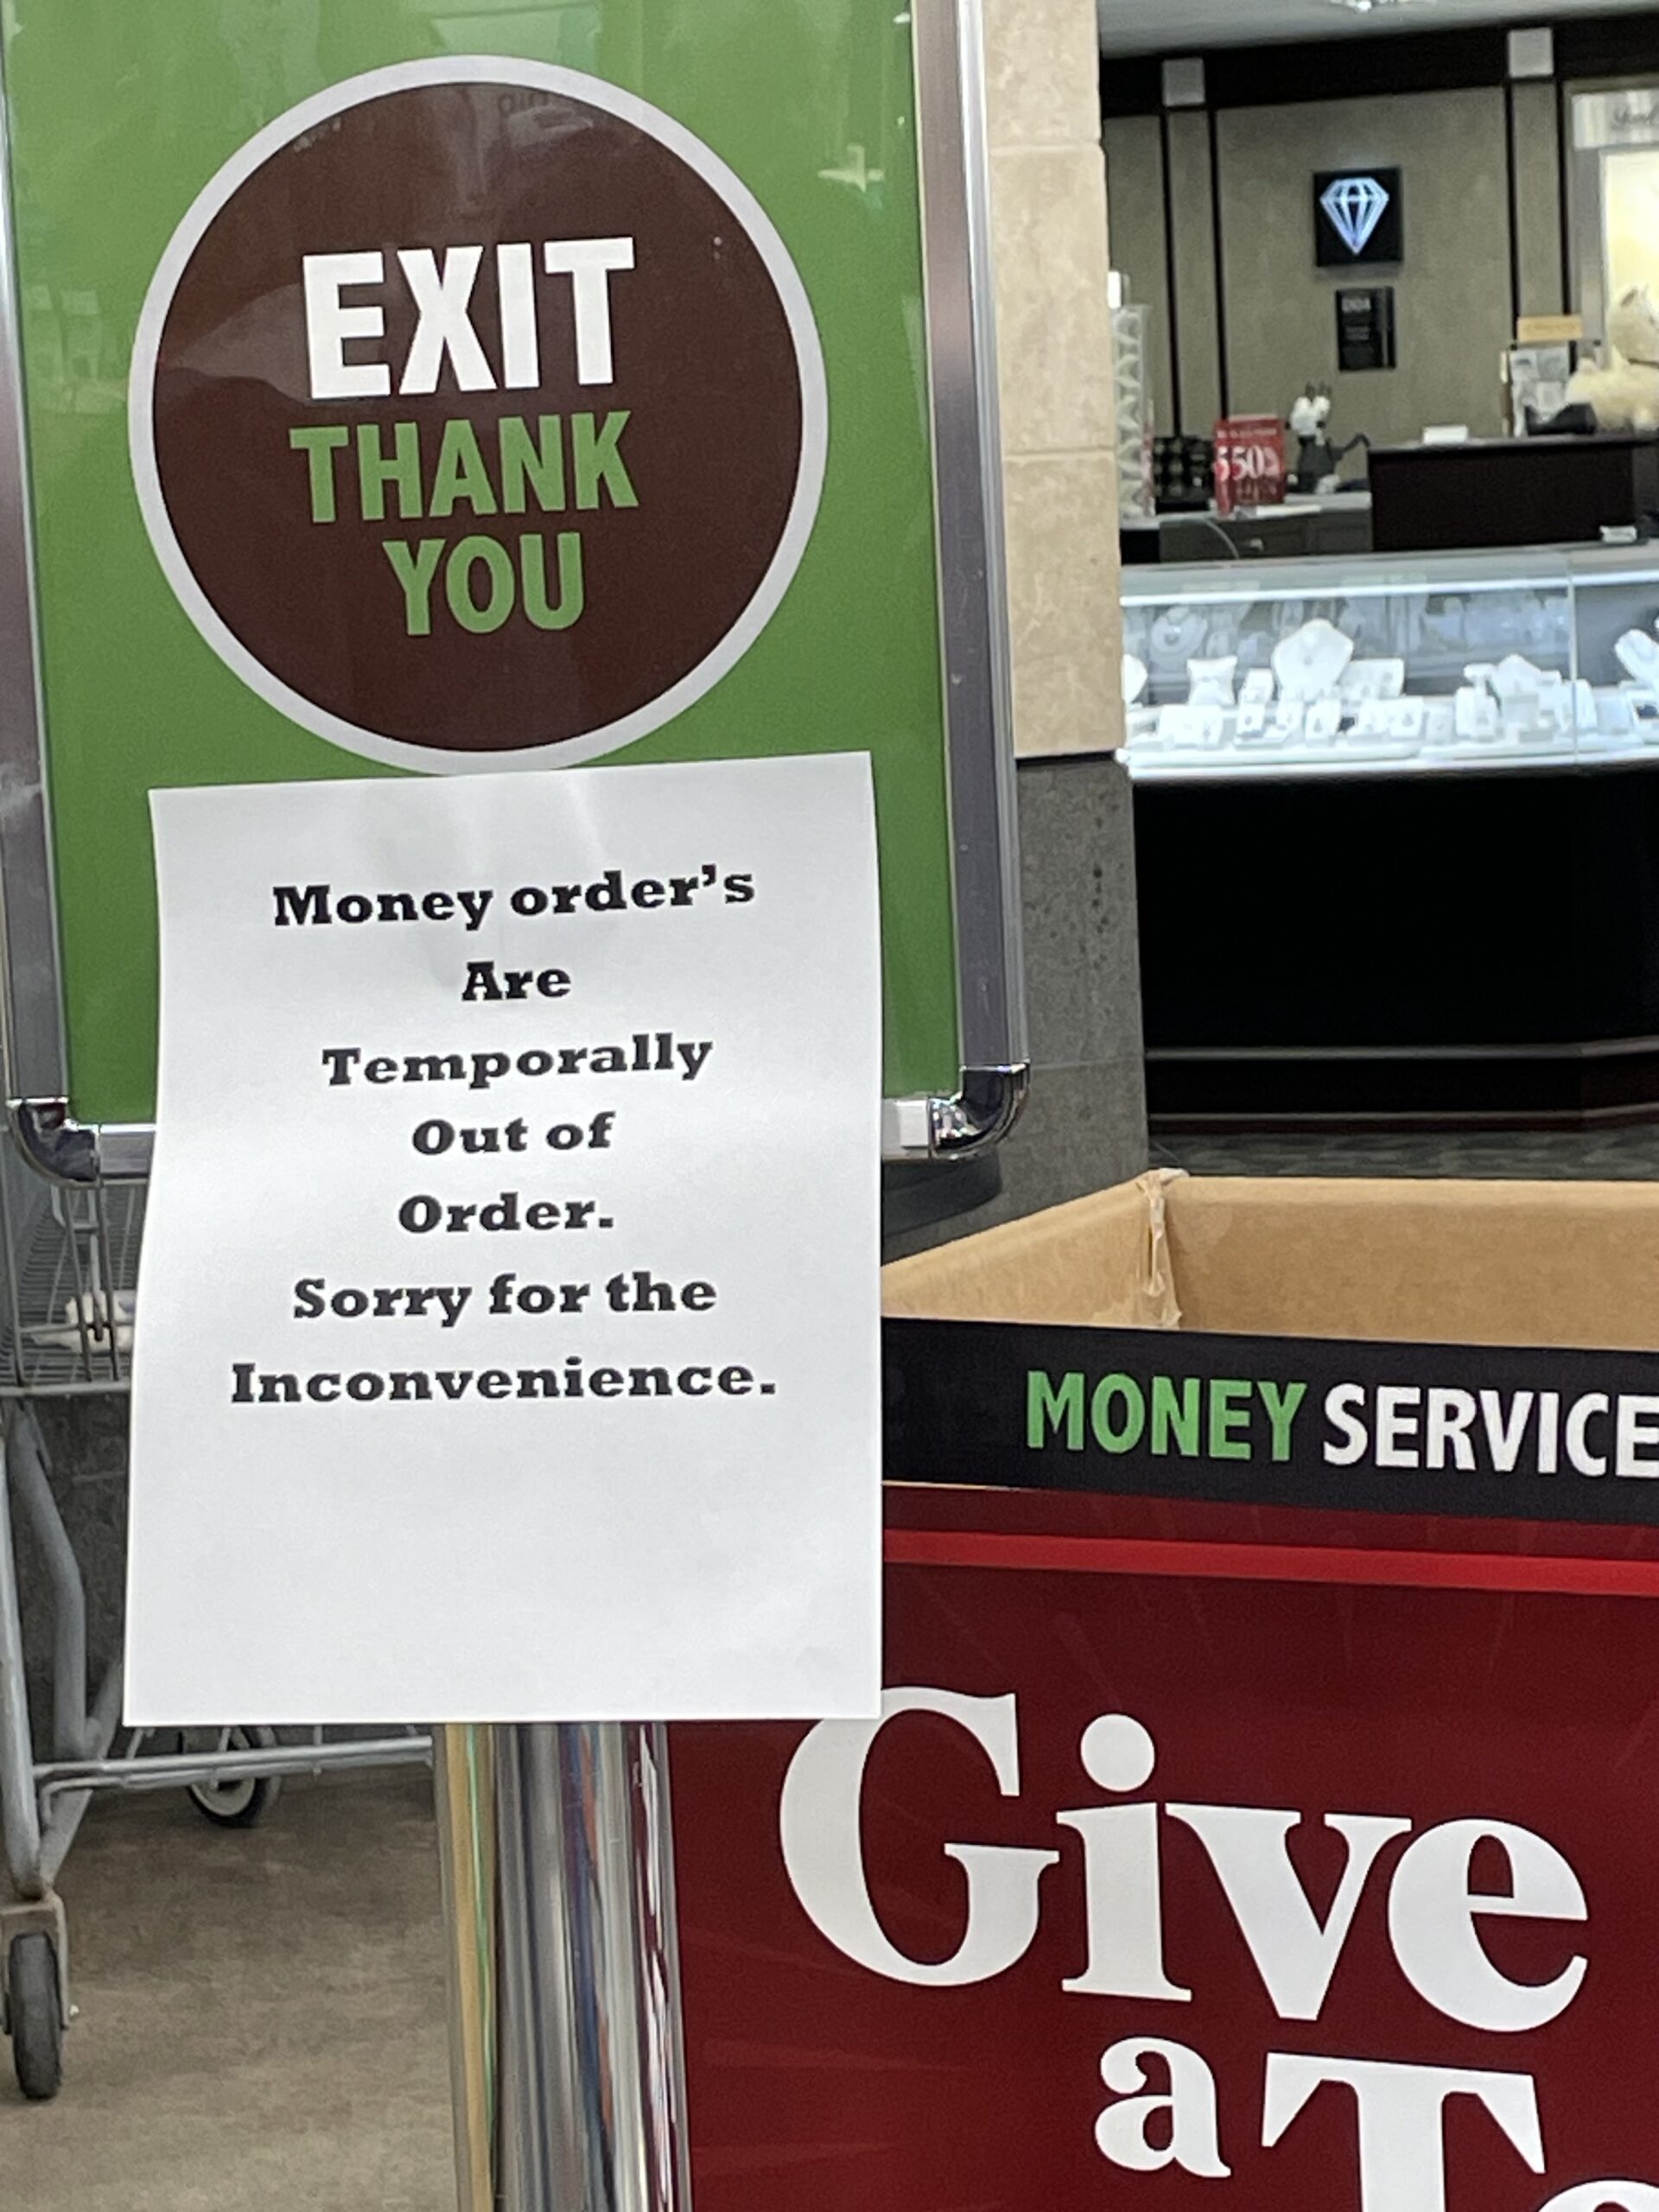 Sign in store that says: Money order's/ Temporally/Out of/Order./Sorry for the/Inconvenience